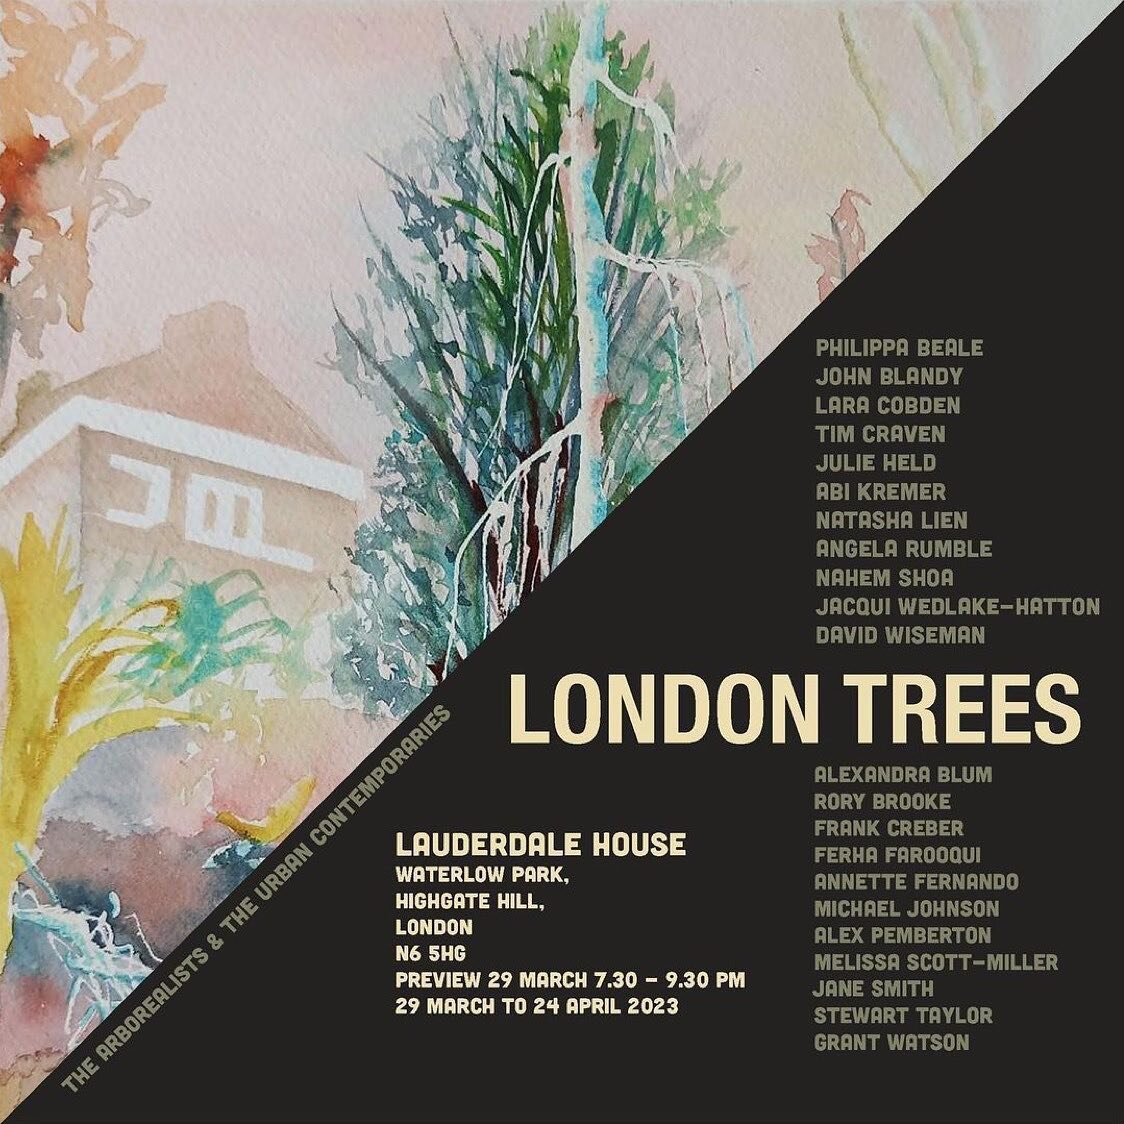 Repost from @urbancontemporariesgroup
&bull;
We are delighted that several of our Urban Contemporaries Group are participating in a forthcoming show celebrating Trees in the urban environment. London Trees is a joint exhibition with members of @the_a